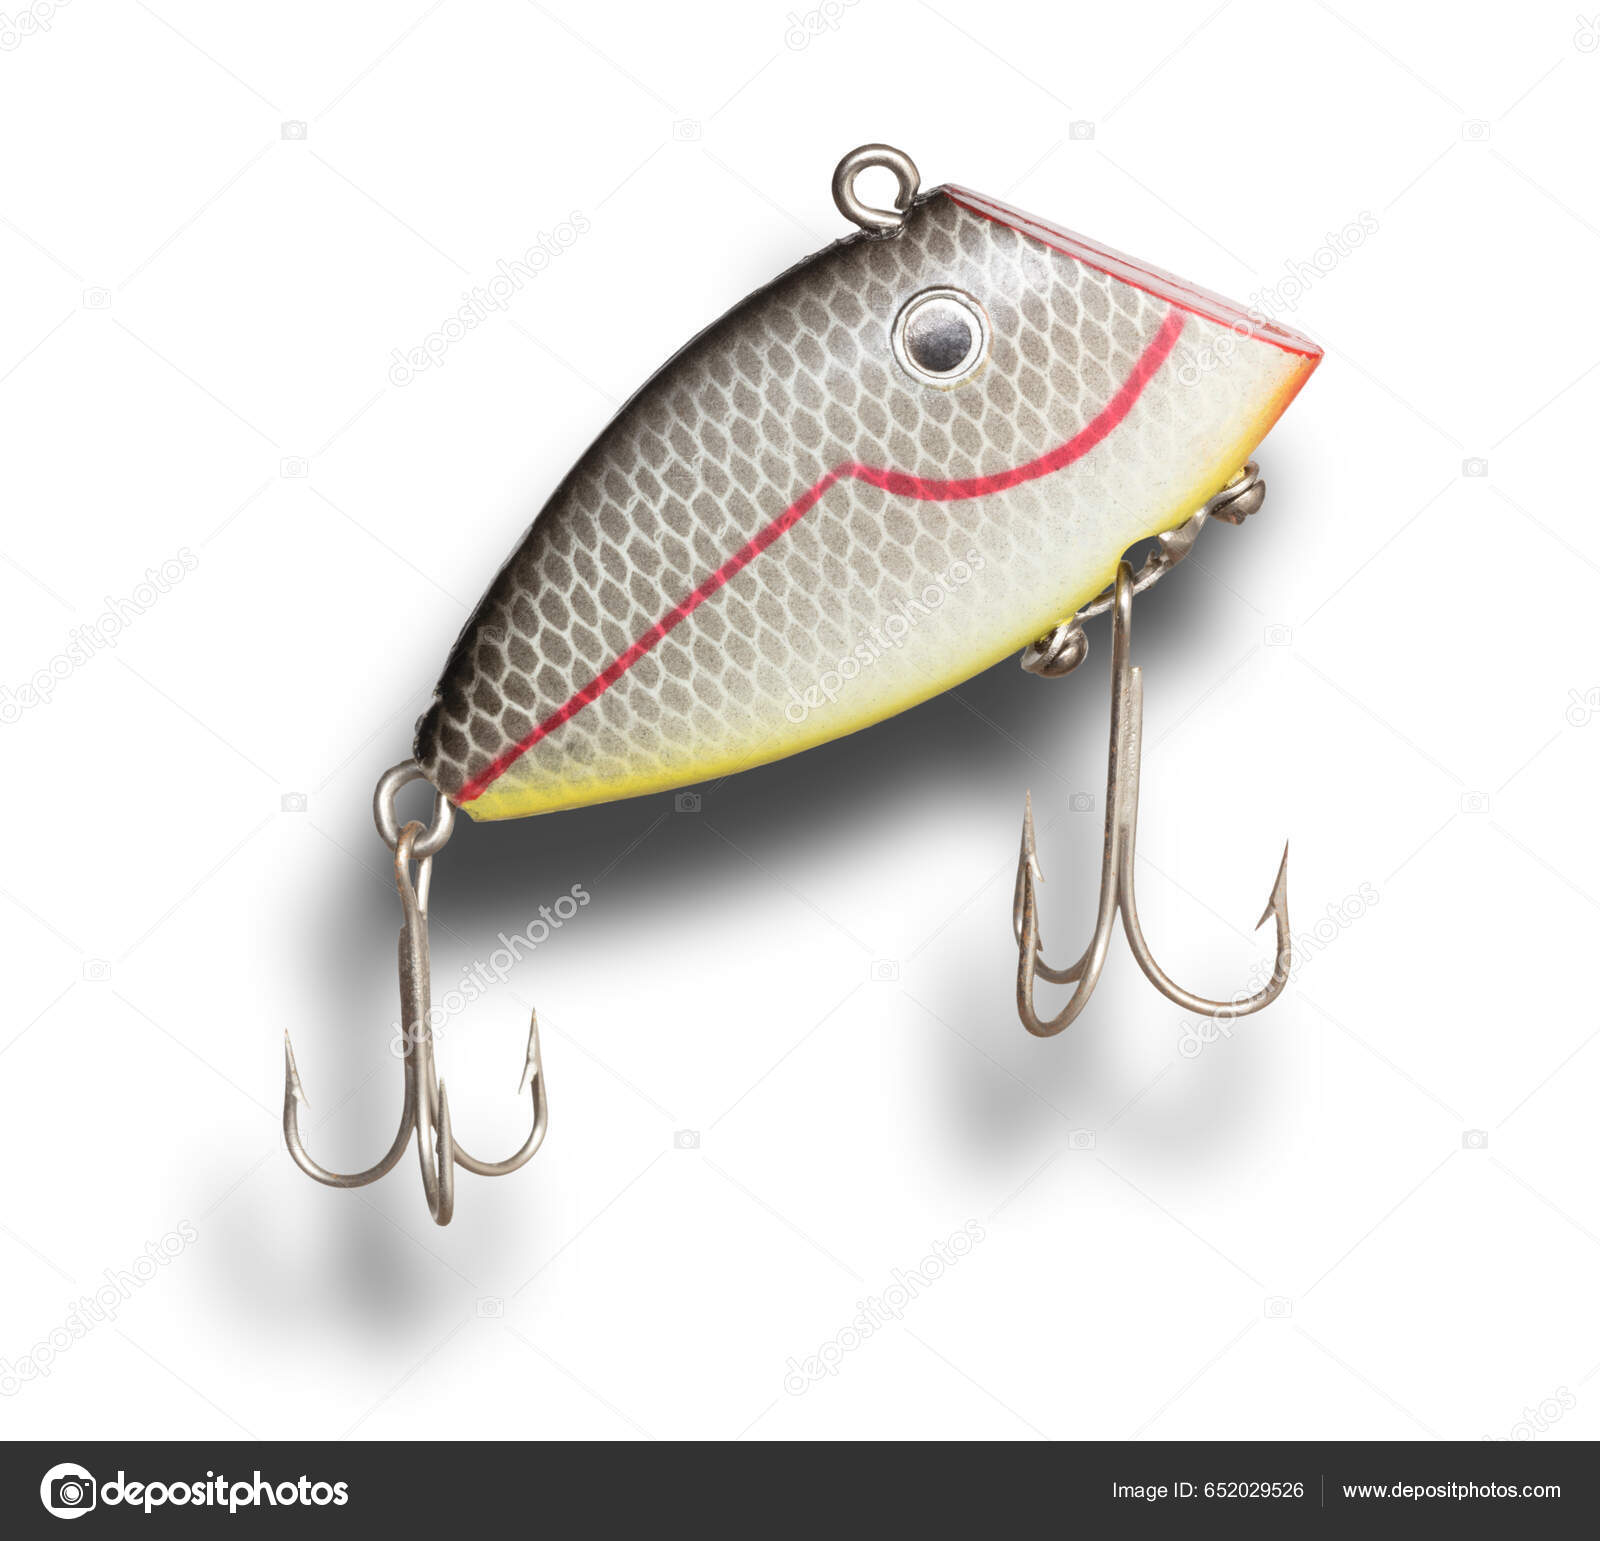 Flat Front Articifial Fishing Lure Black Red White Yellow — Stock Photo ©  gsagi #652029526